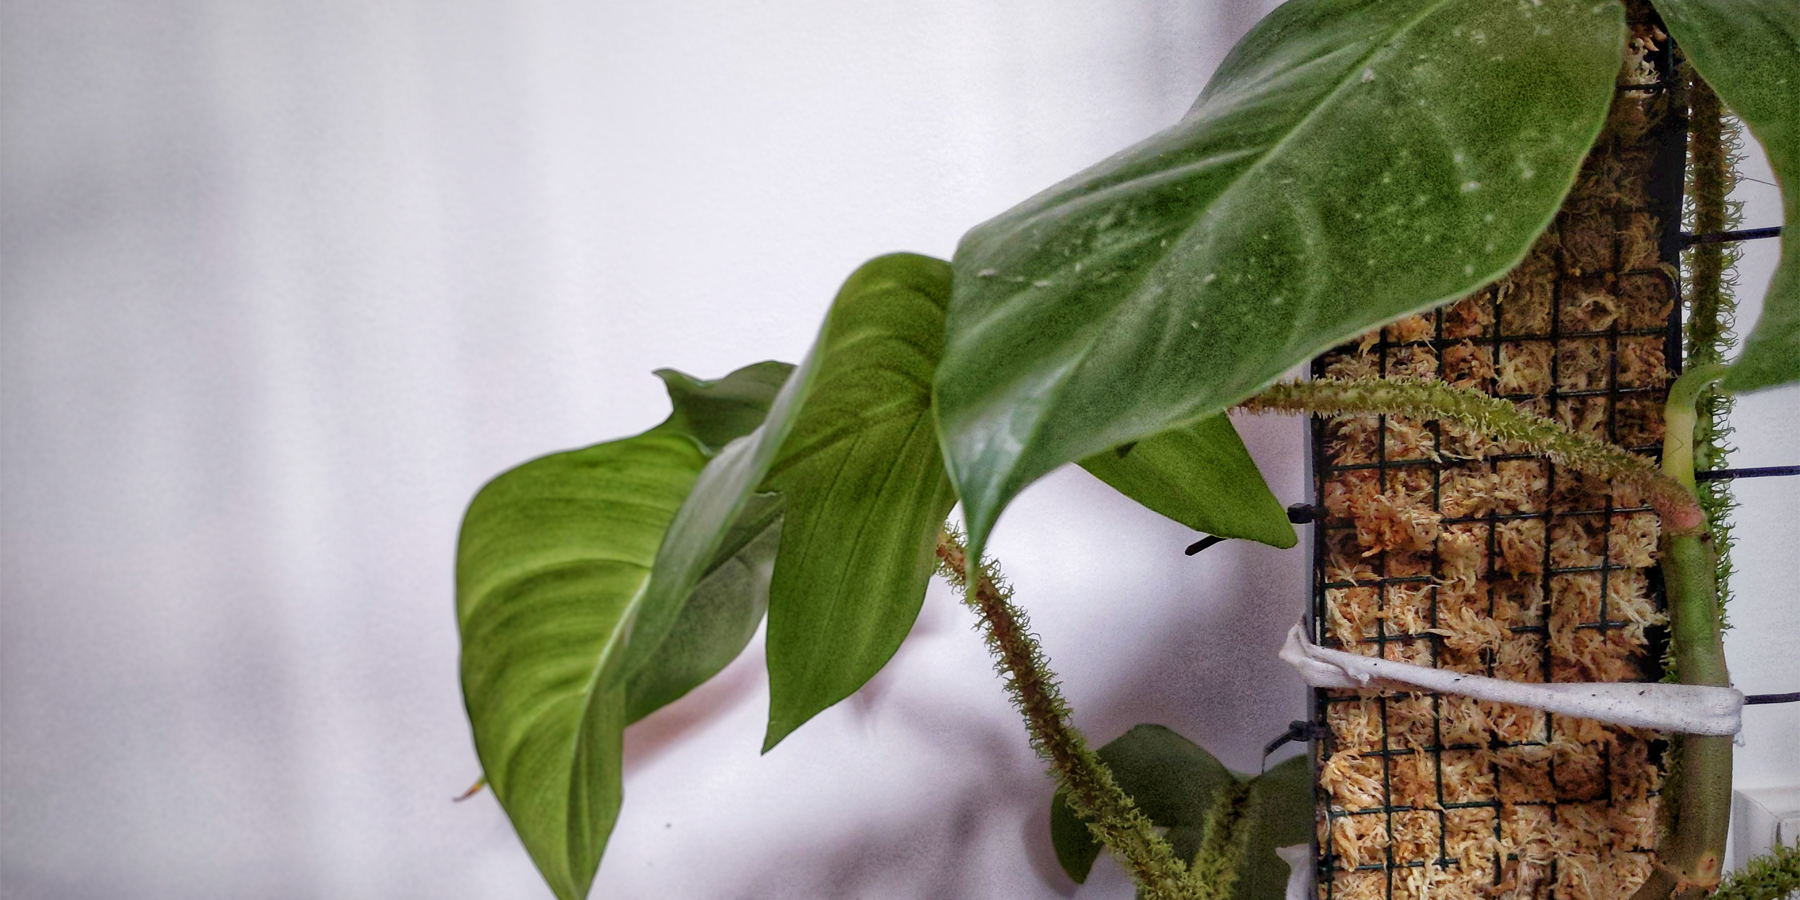 Totems & Indoor Plants: The What, Why and When